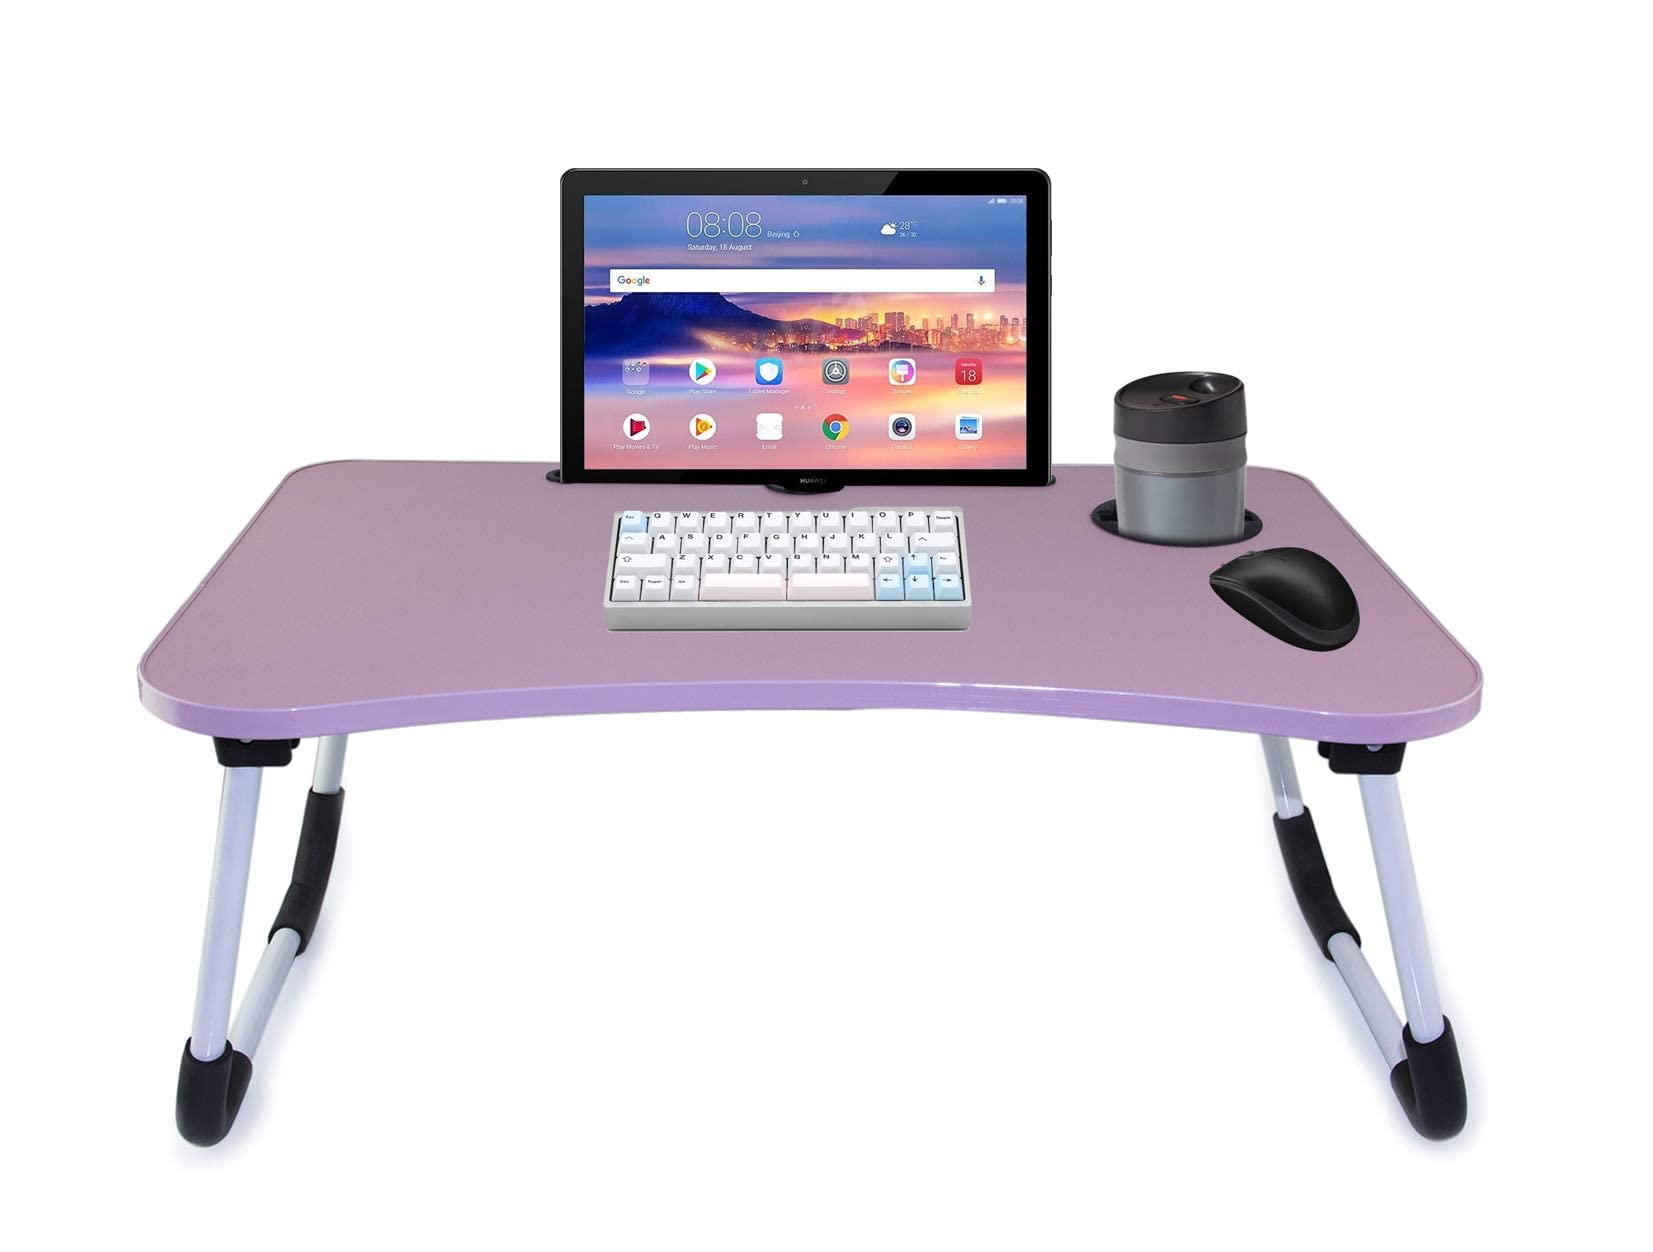 VIO Laptop Bed Tray Table Lap Desk Stand with Foldable Legs & Cup Slot for Watching Movie, Reading Book & Working On Bed (Pink)